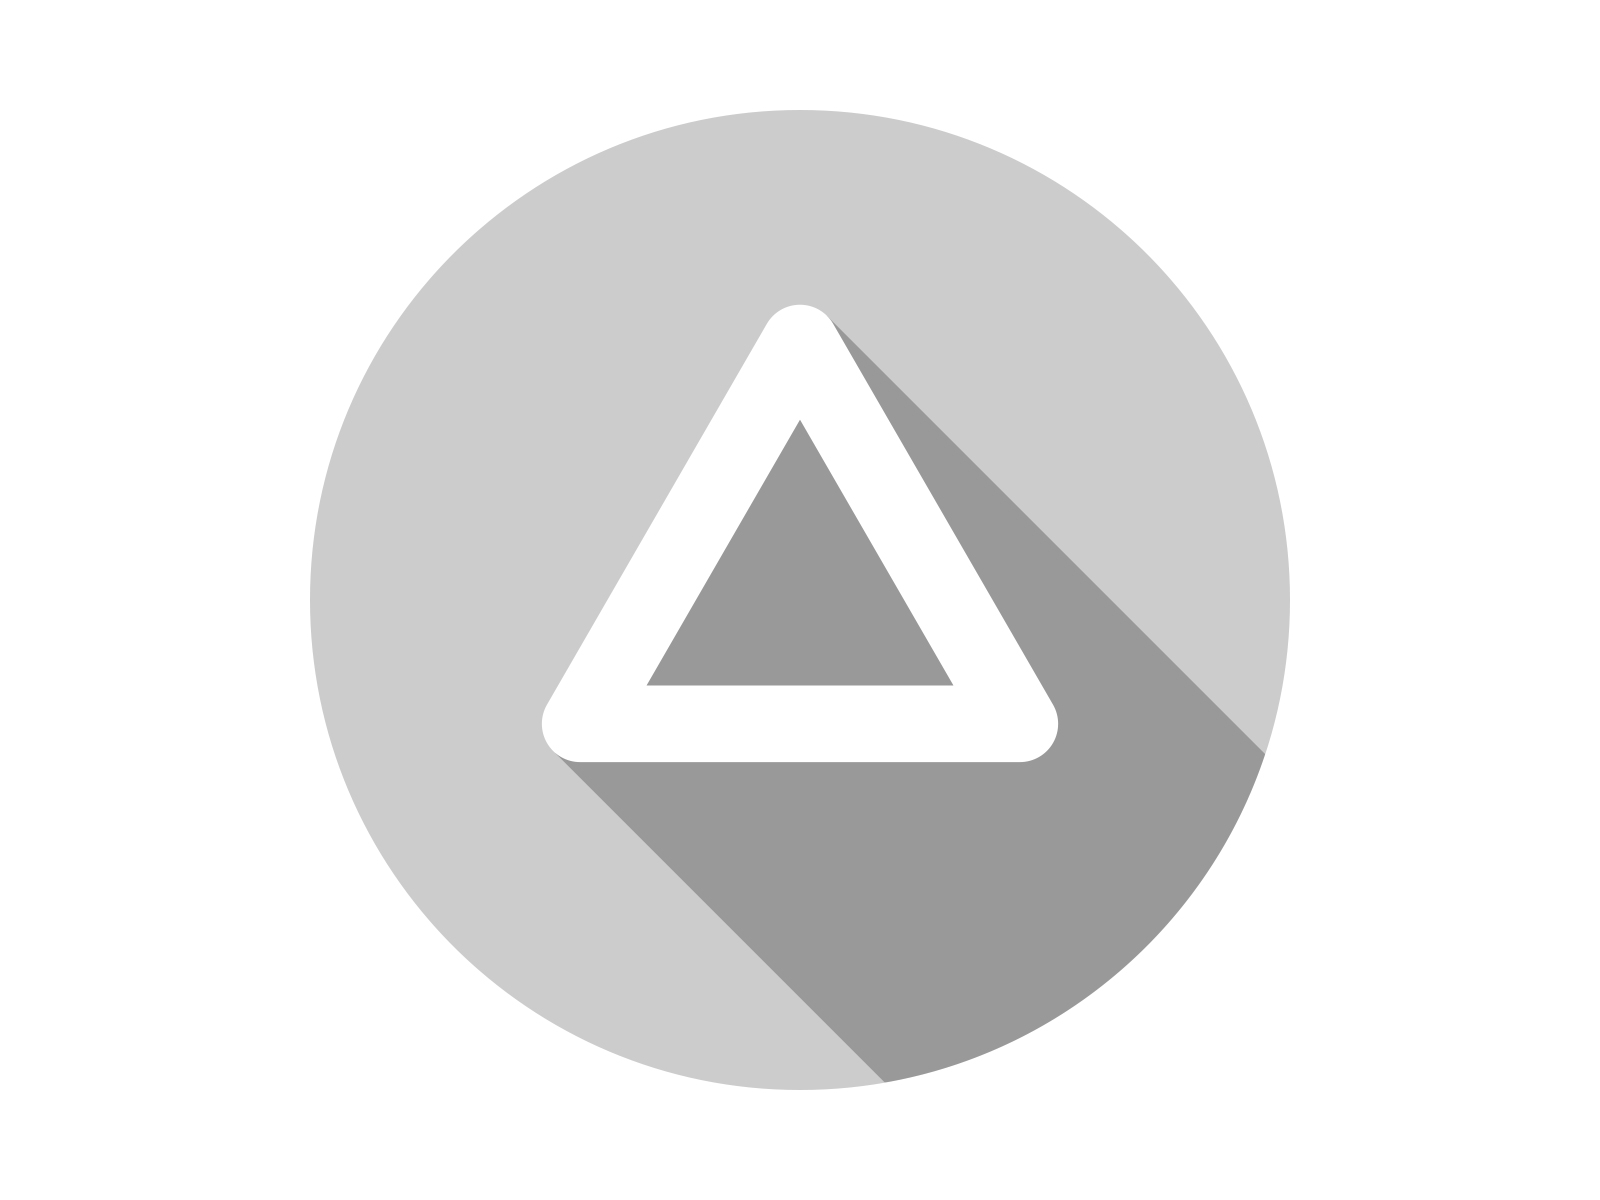 Playstation Triangle Button Round Icon